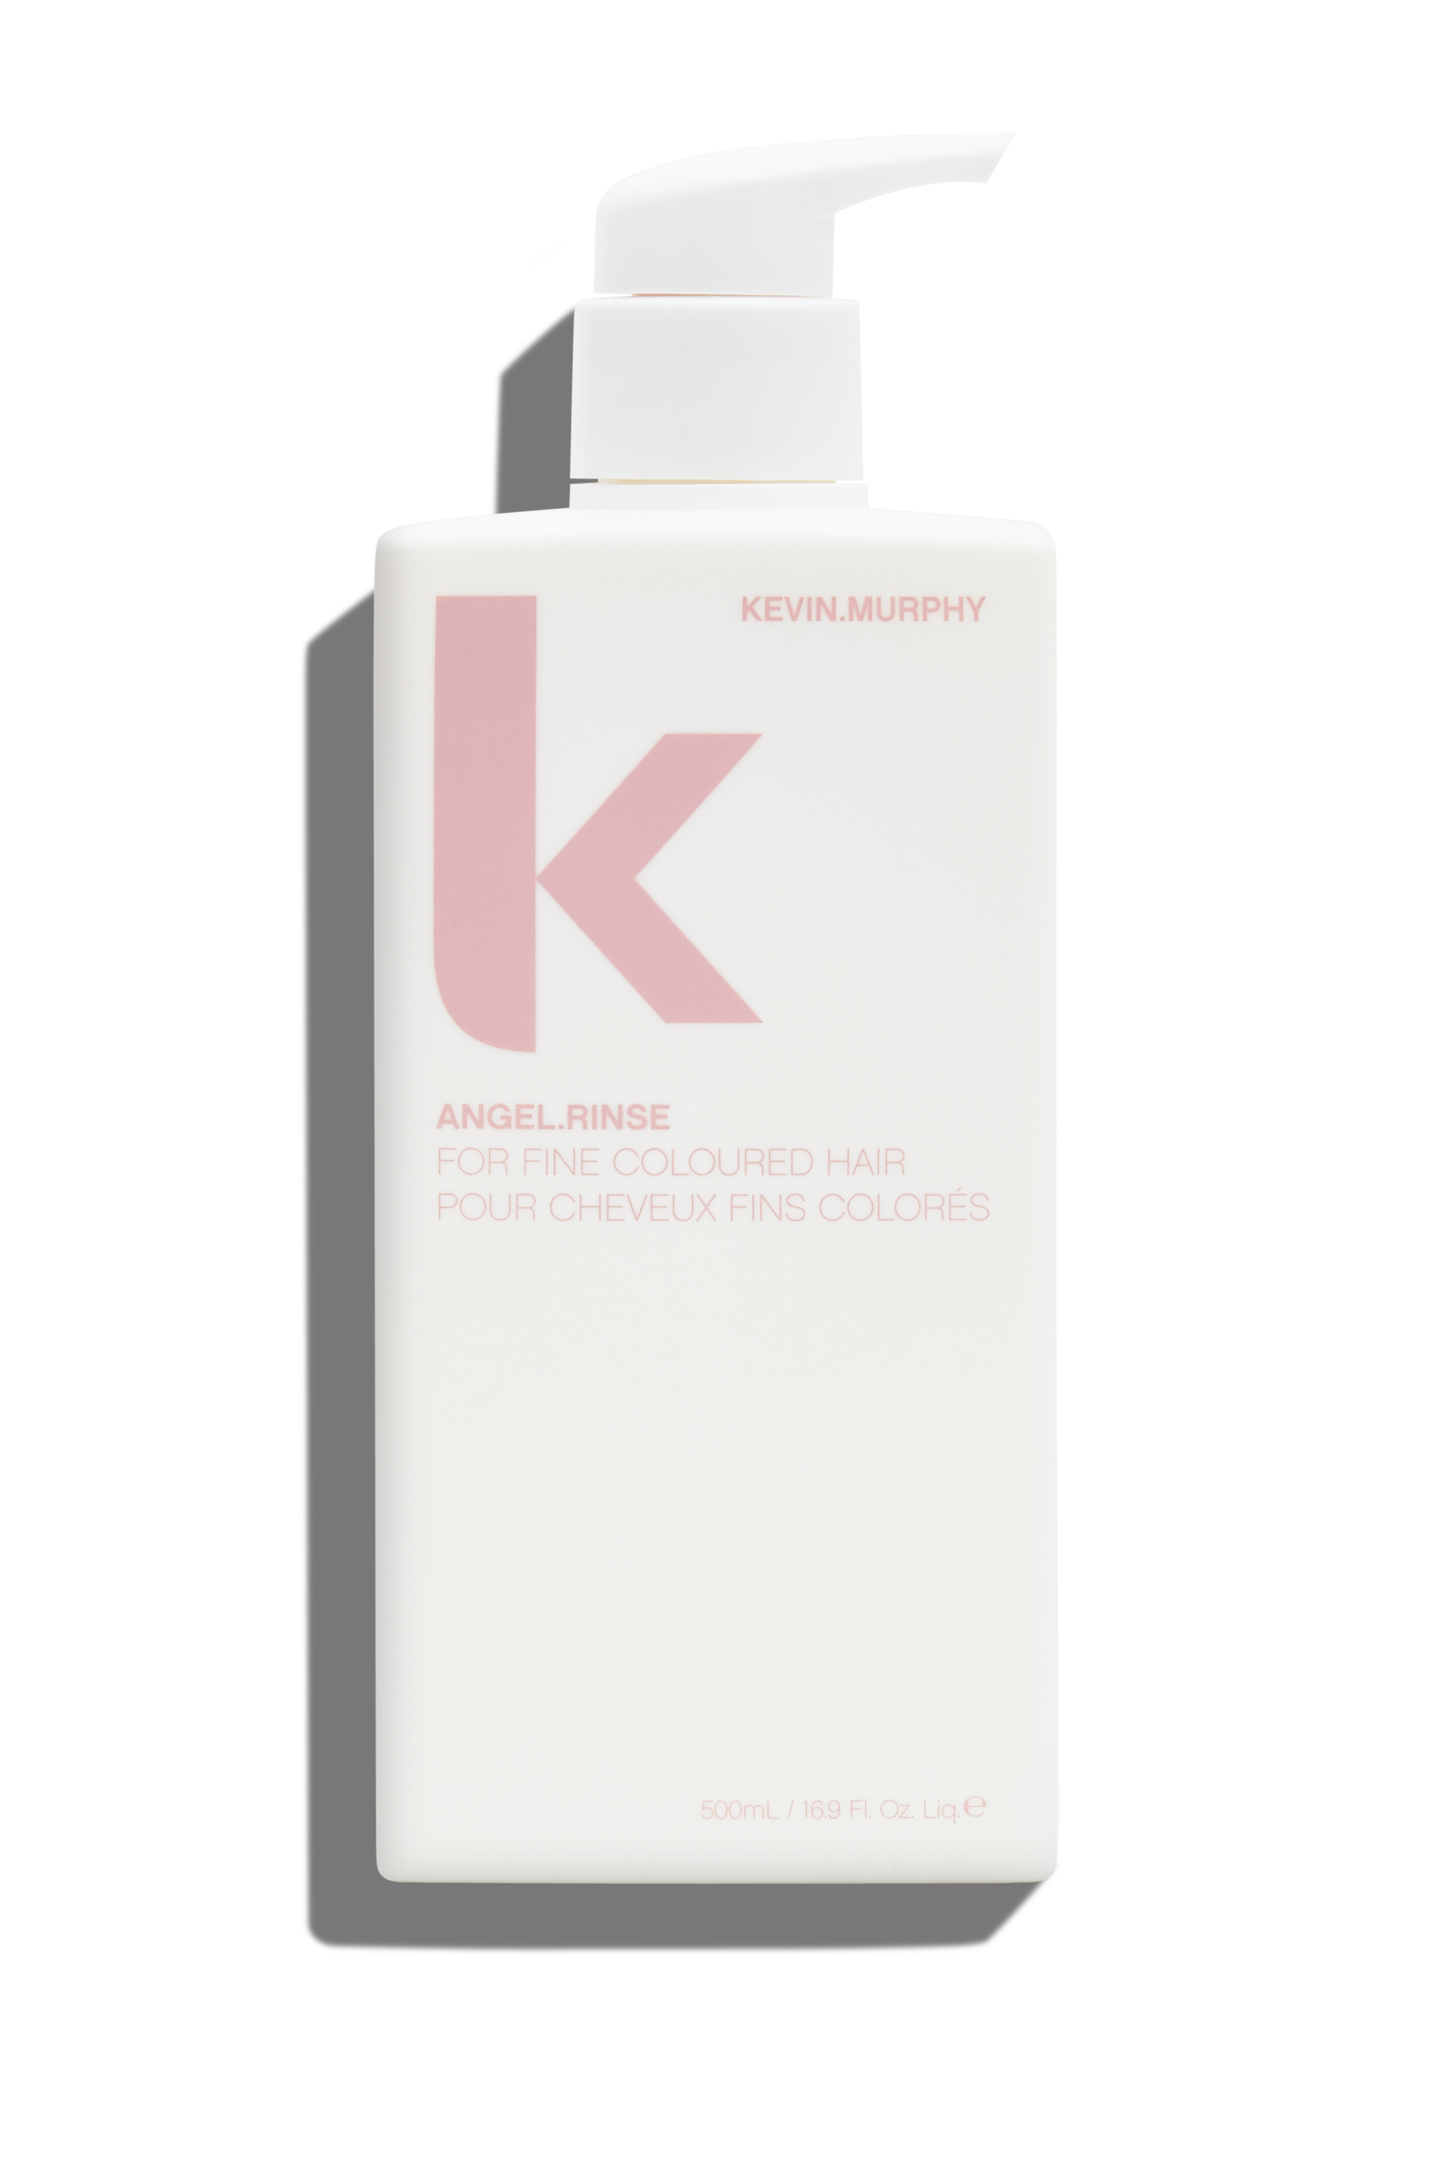 KEVIN.MURPHY Angel Rinse Conditioner